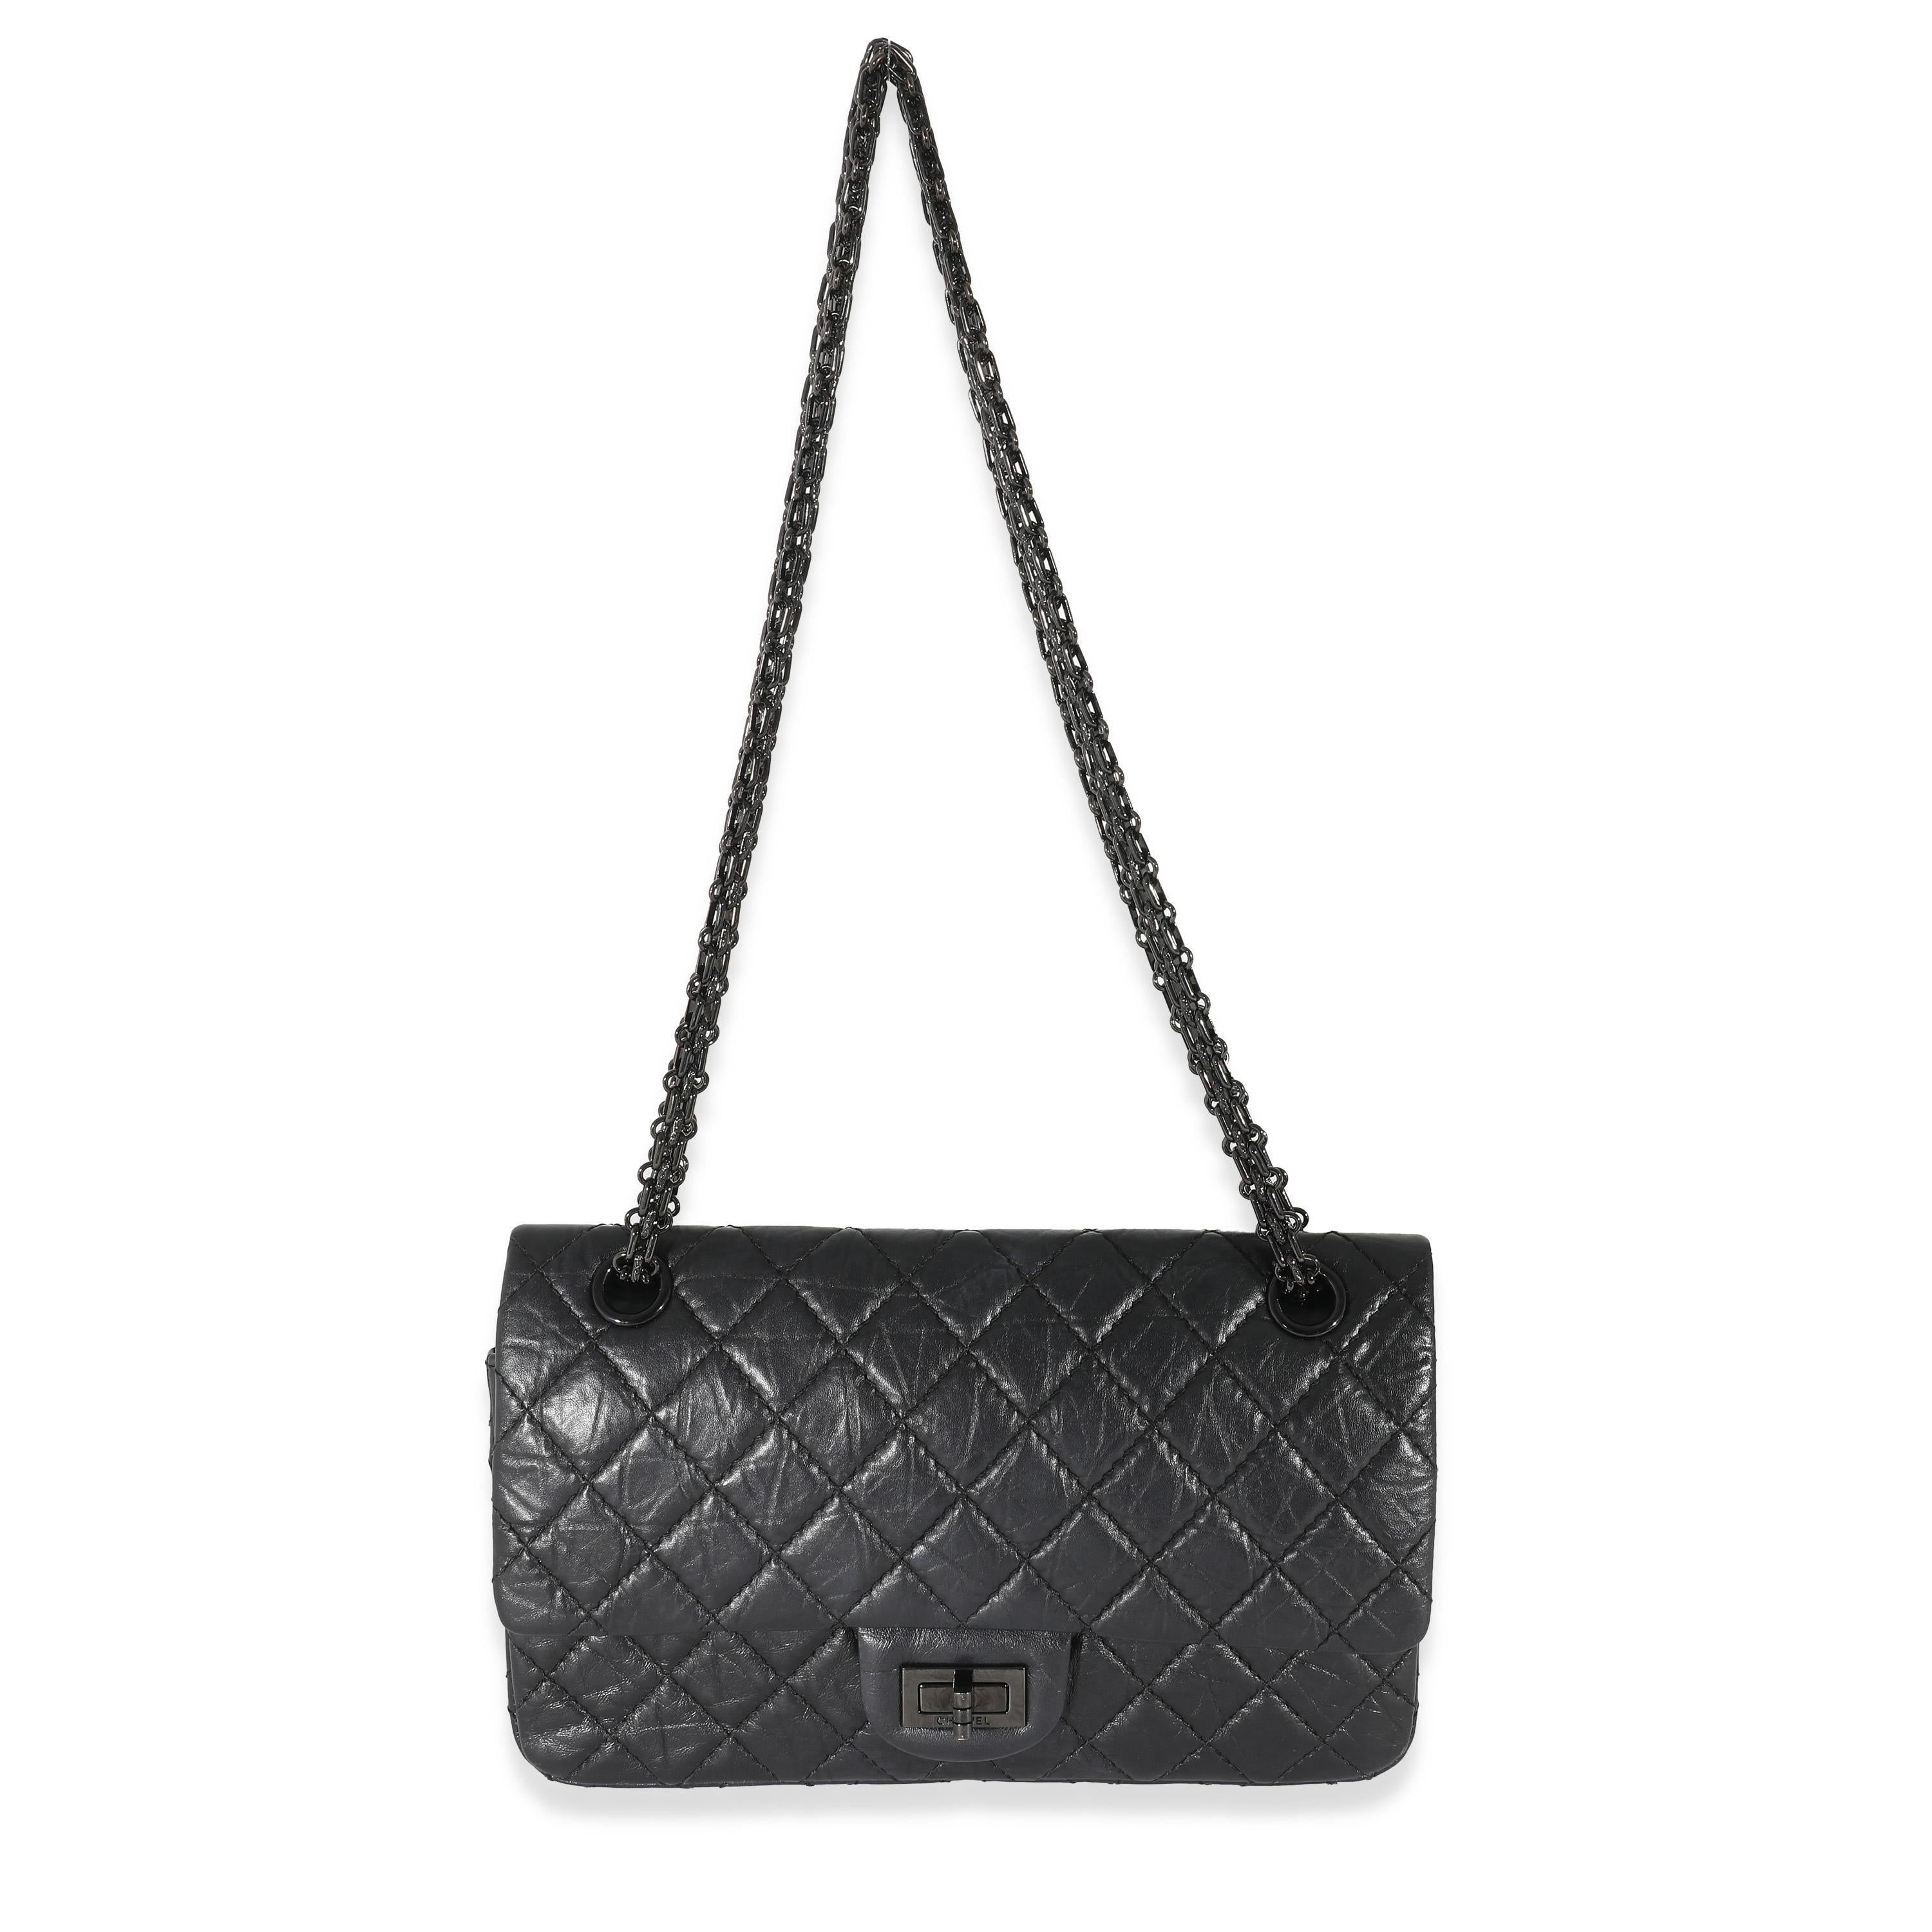 Listing Title: Chanel So Black Quilted Calfskin 2.55 Reissue 225 Double Flap Bag
SKU: 133145
Condition: Pre-owned 
Condition Description: A timeless classic that never goes out of style, the flap bag from Chanel dates back to 1955 and has seen a